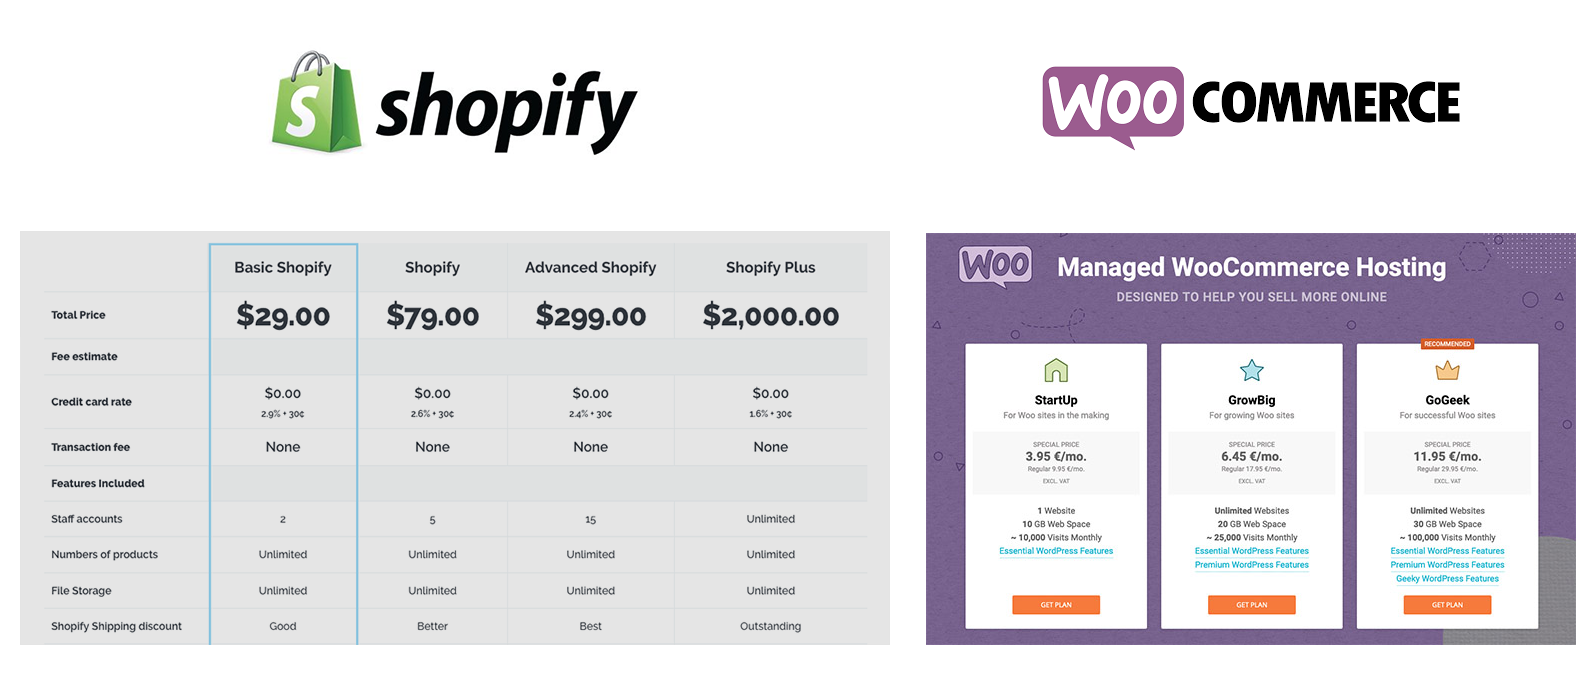 prince-difference-shopify-vs-woo-commerce